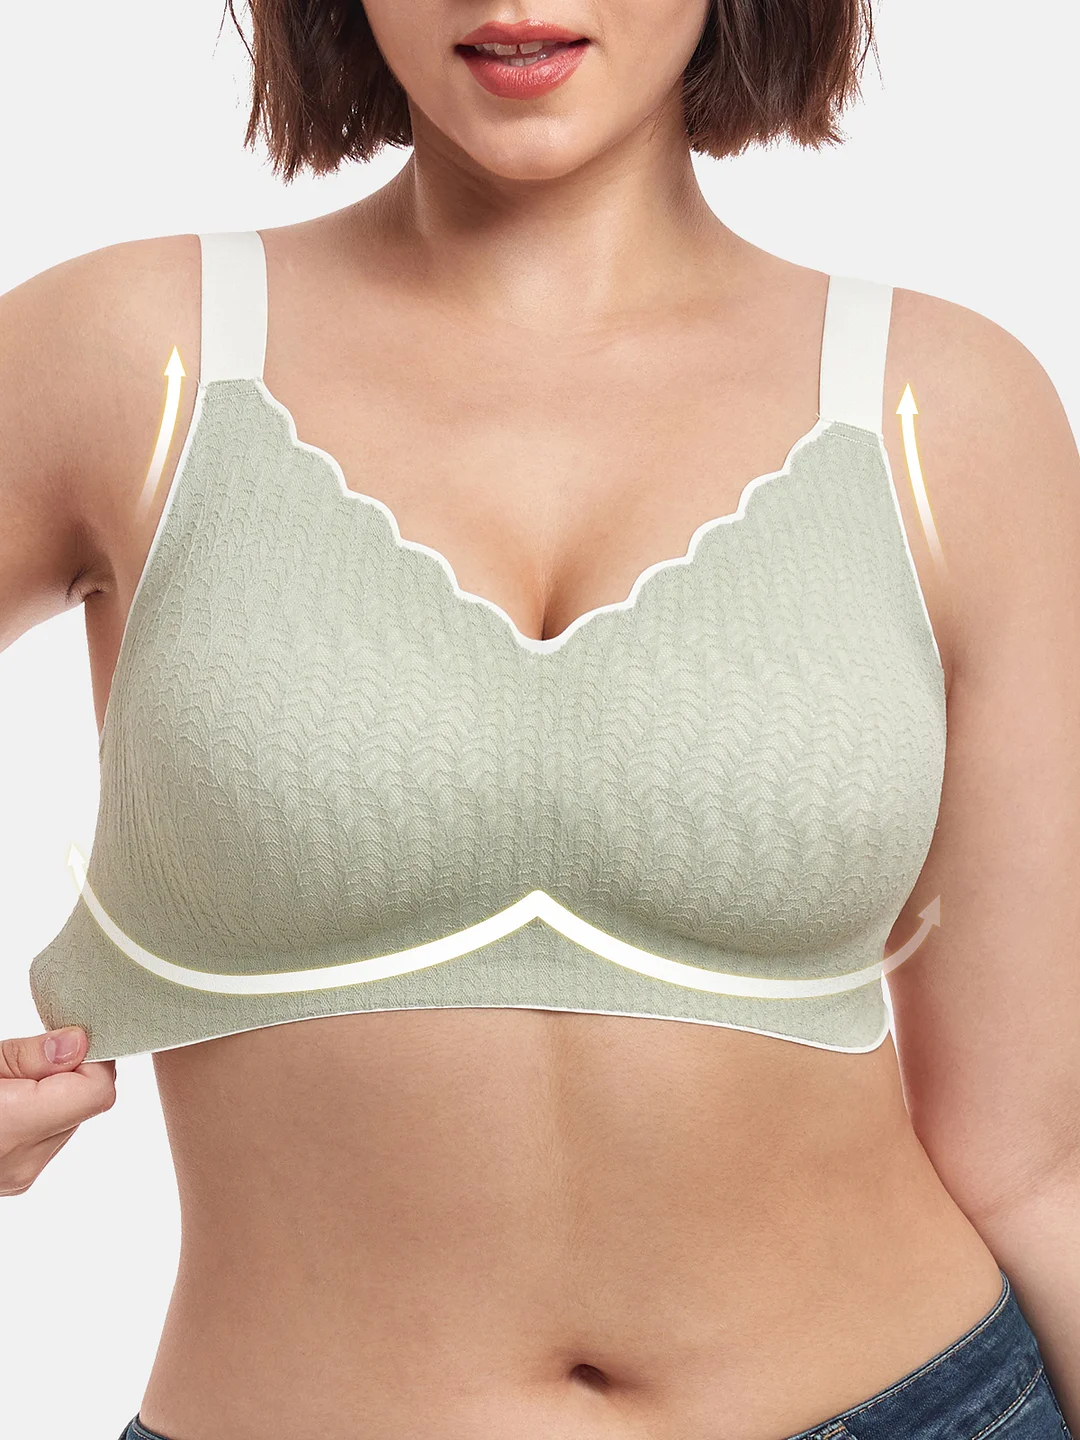 Barely There Women Adjustable Seamless bras 